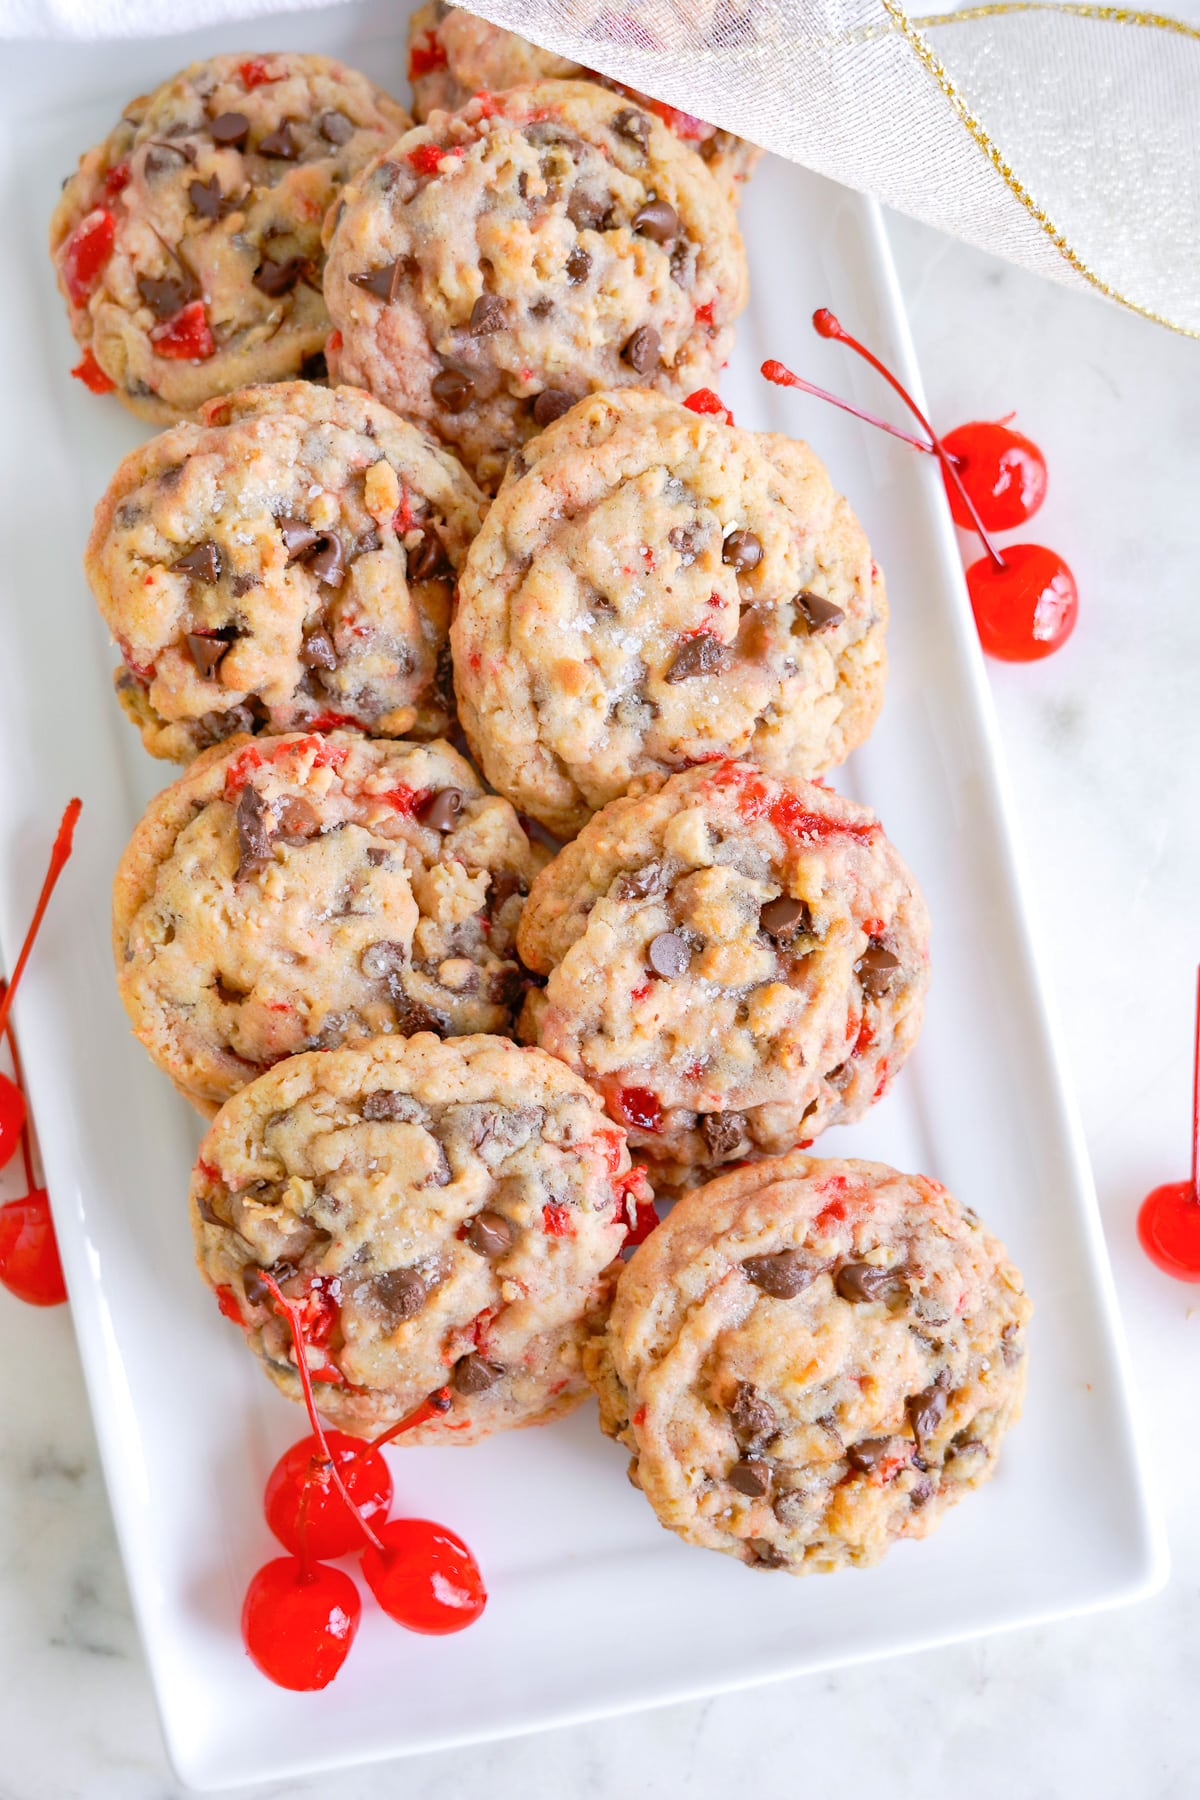 Maraschino cherry cookies with chocolate chips on a white plater.